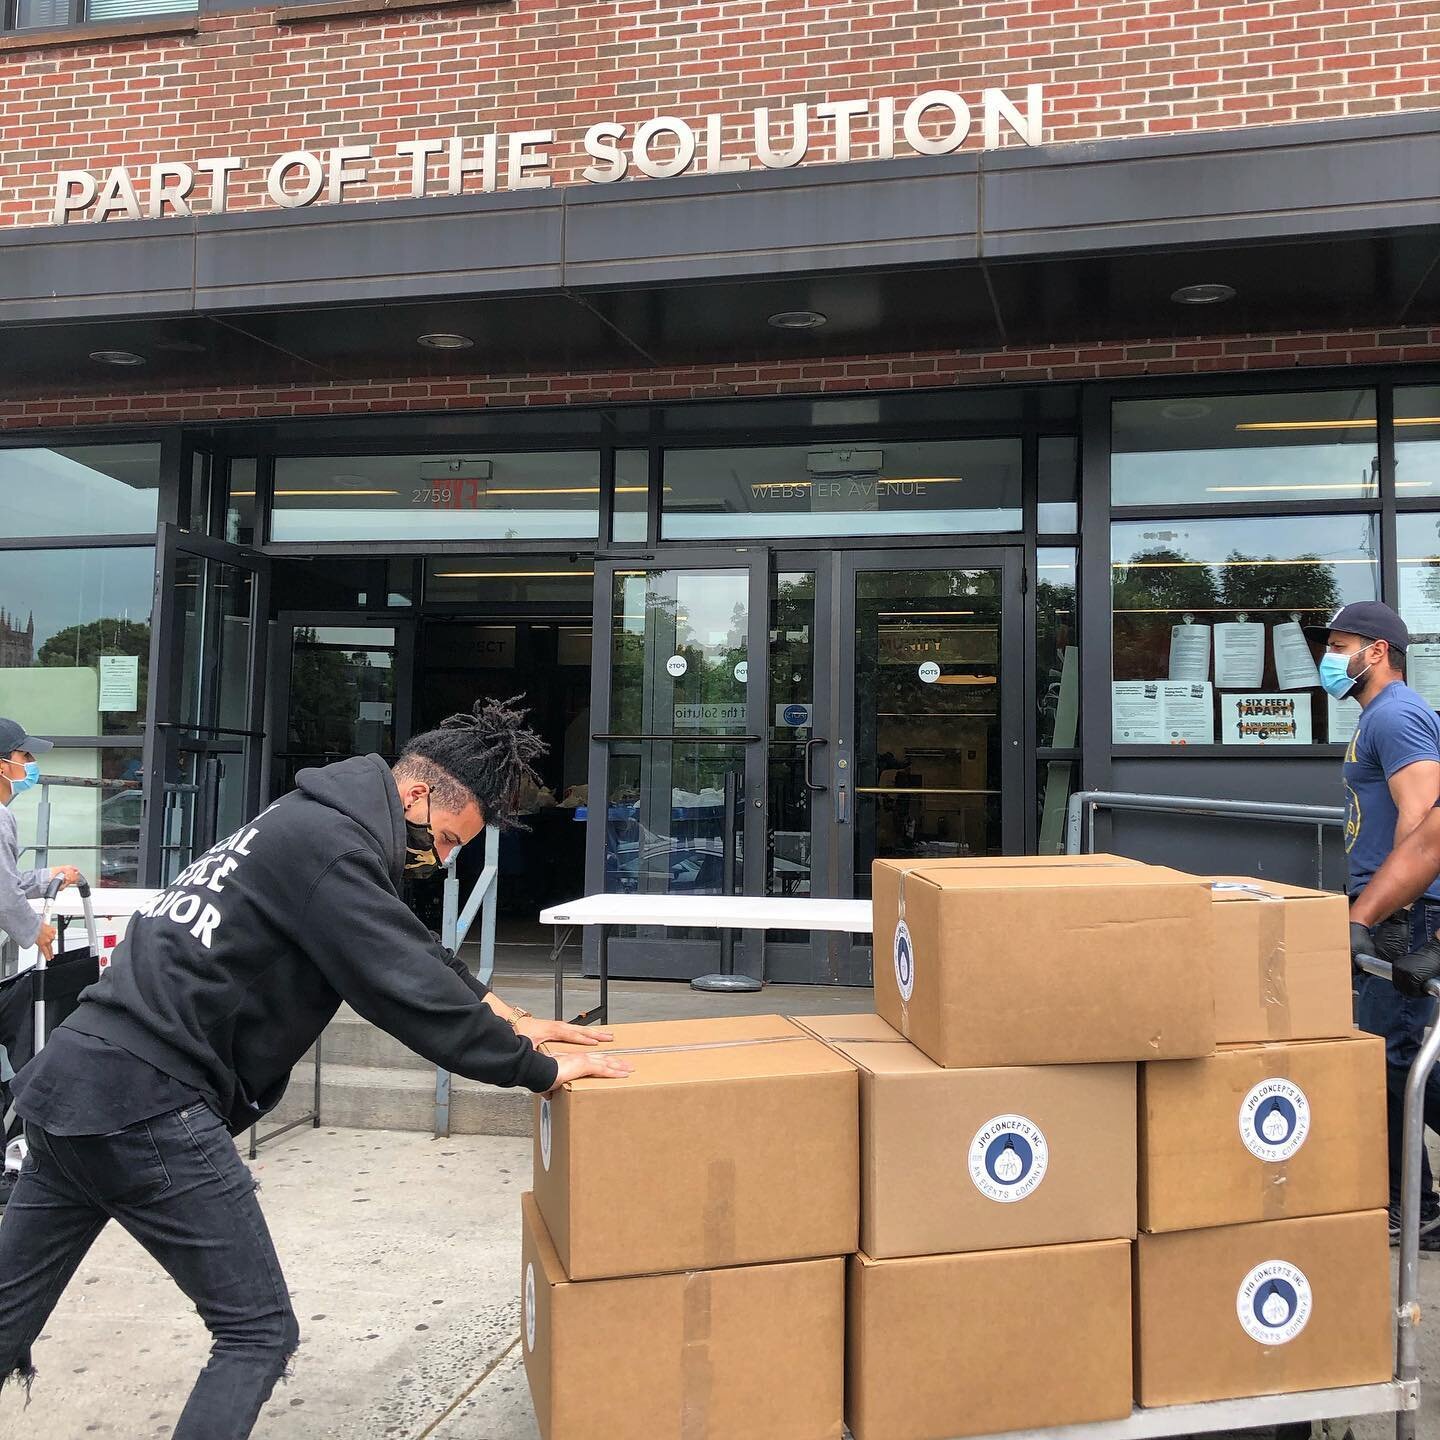 Be Part of the Solution! Thanks to the boundless generosity of our sponsors, we are honored to commit 4,000 meals to serve the Bronx community with @potsbronx #cateringourcommunity